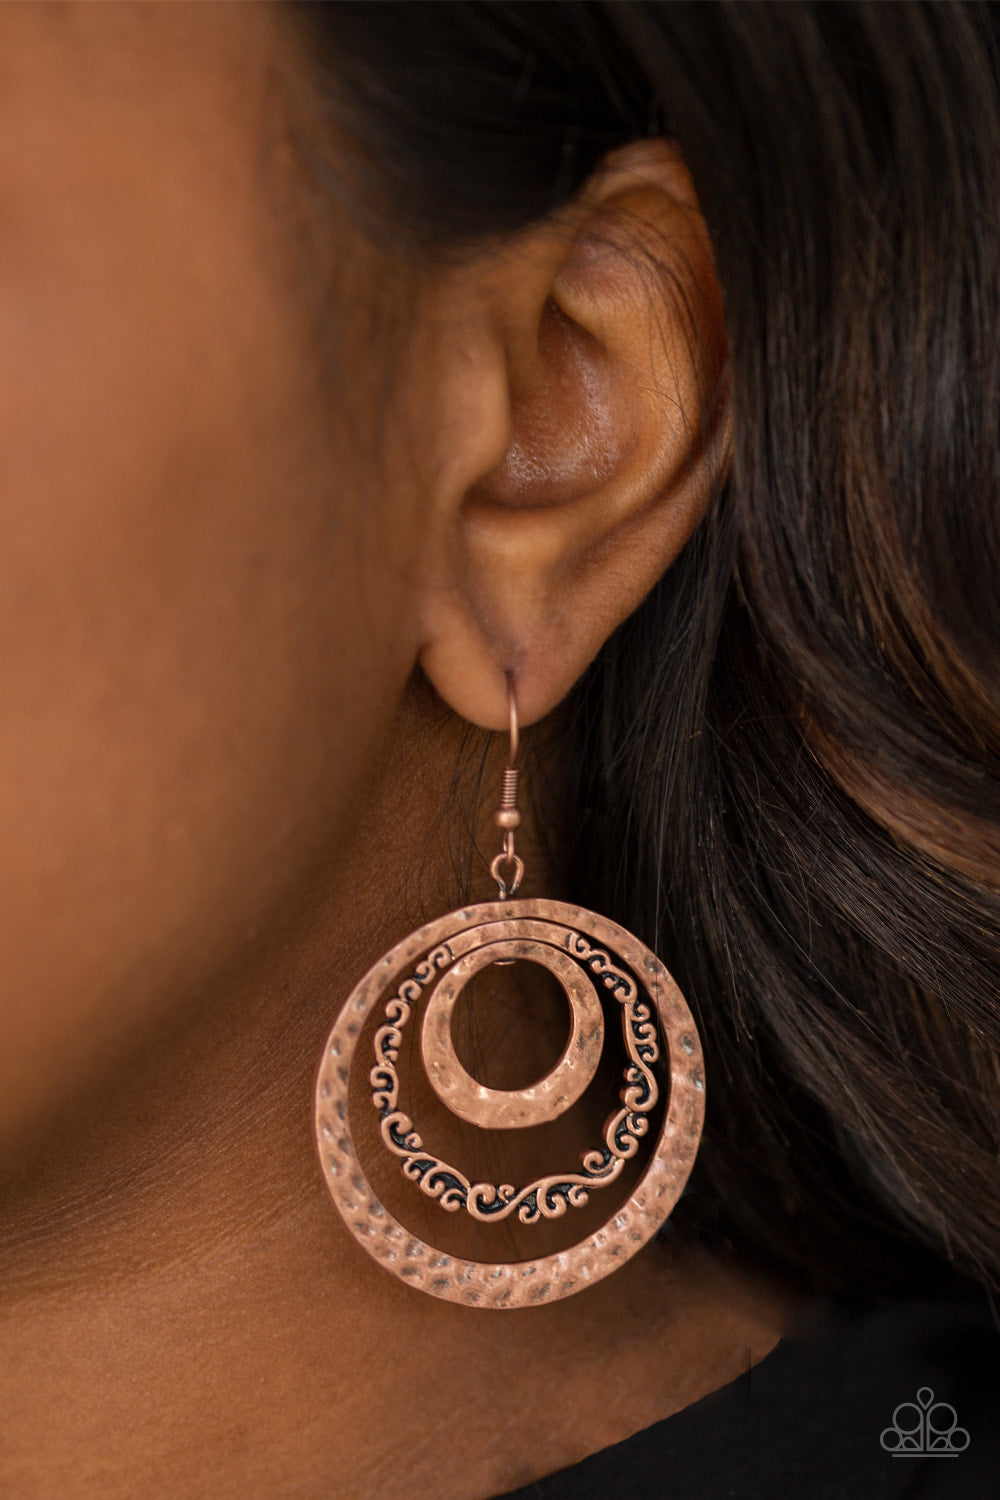 Out Of Control Shimmer - Copper - Earrings - Paparazzi Accessories